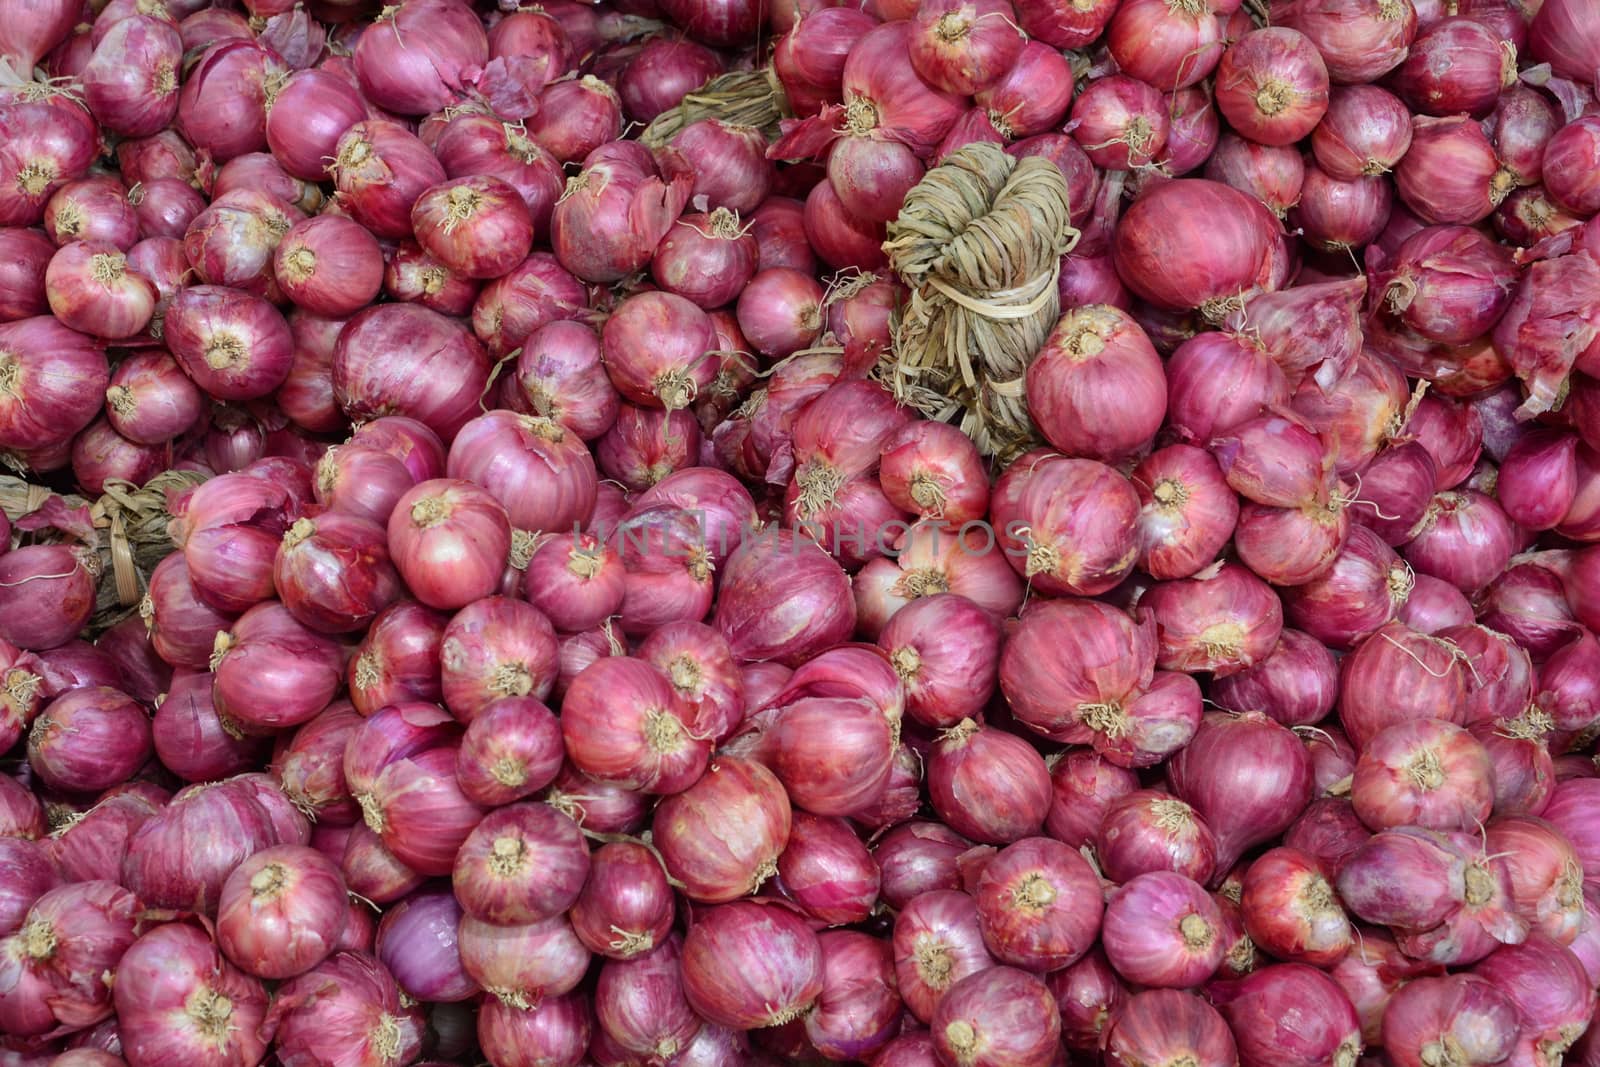 The shallot is a type of onion, specifically a botanical variety of the species Allium cepa by ideation90